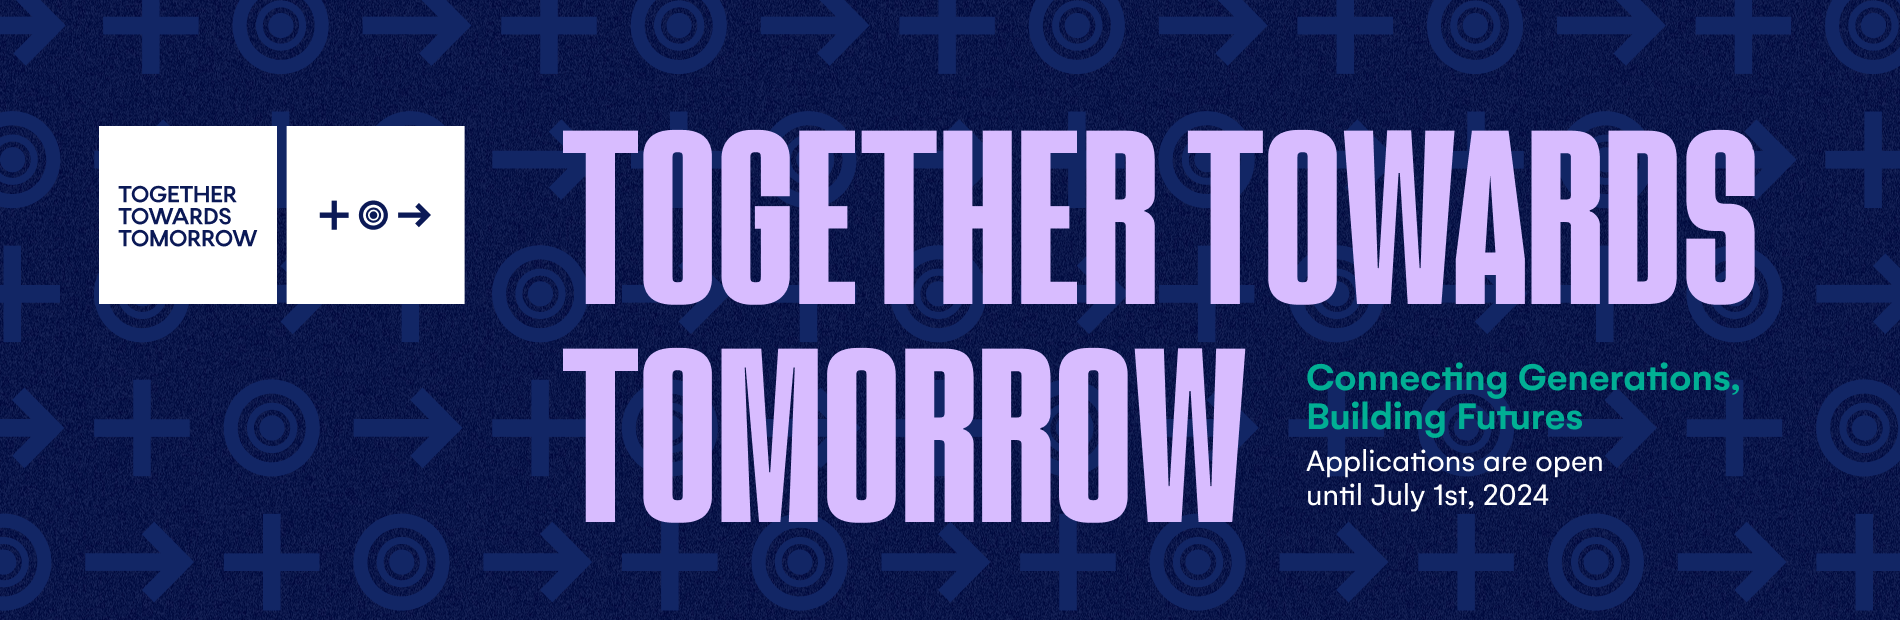 Header banner for the Together Towards Tomorrow Changemaker Challenge. It reads "Together towards tomorrow" in large, impact type in lavender, along with text that reads "Connecting Generations, Building Futures, Applications are open until July 1st 2024"